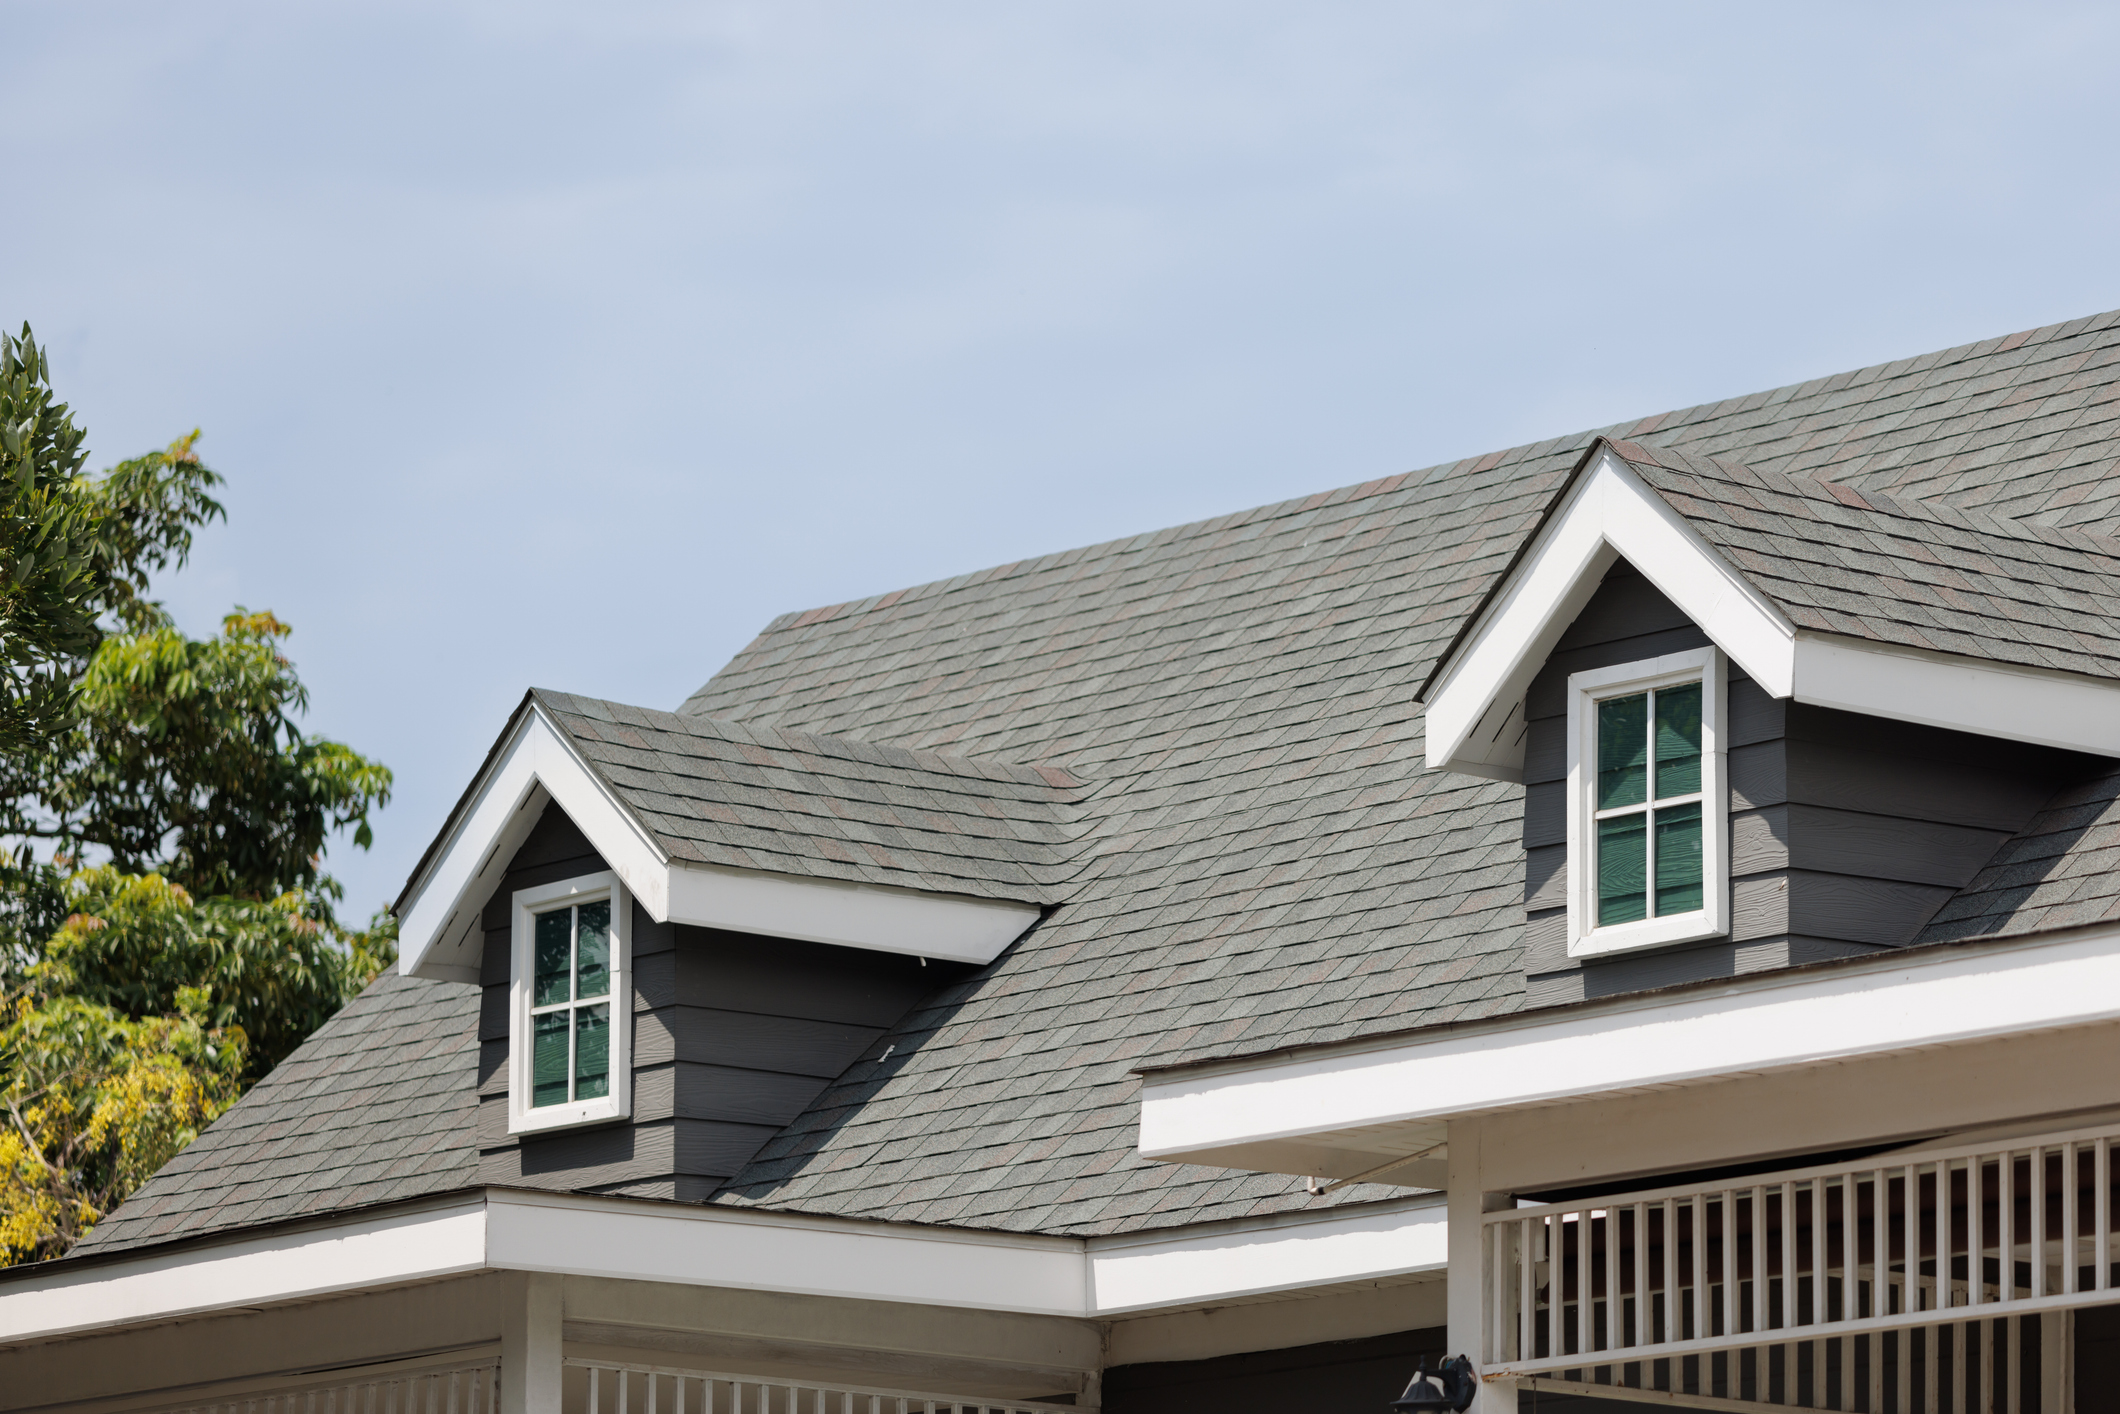 Roof shingles with garret house on top of the house. dark asphalt tiles on the roof background on afternoon time. dark asphalt tiles on the roof background (Photo: iStock - Ratchat)